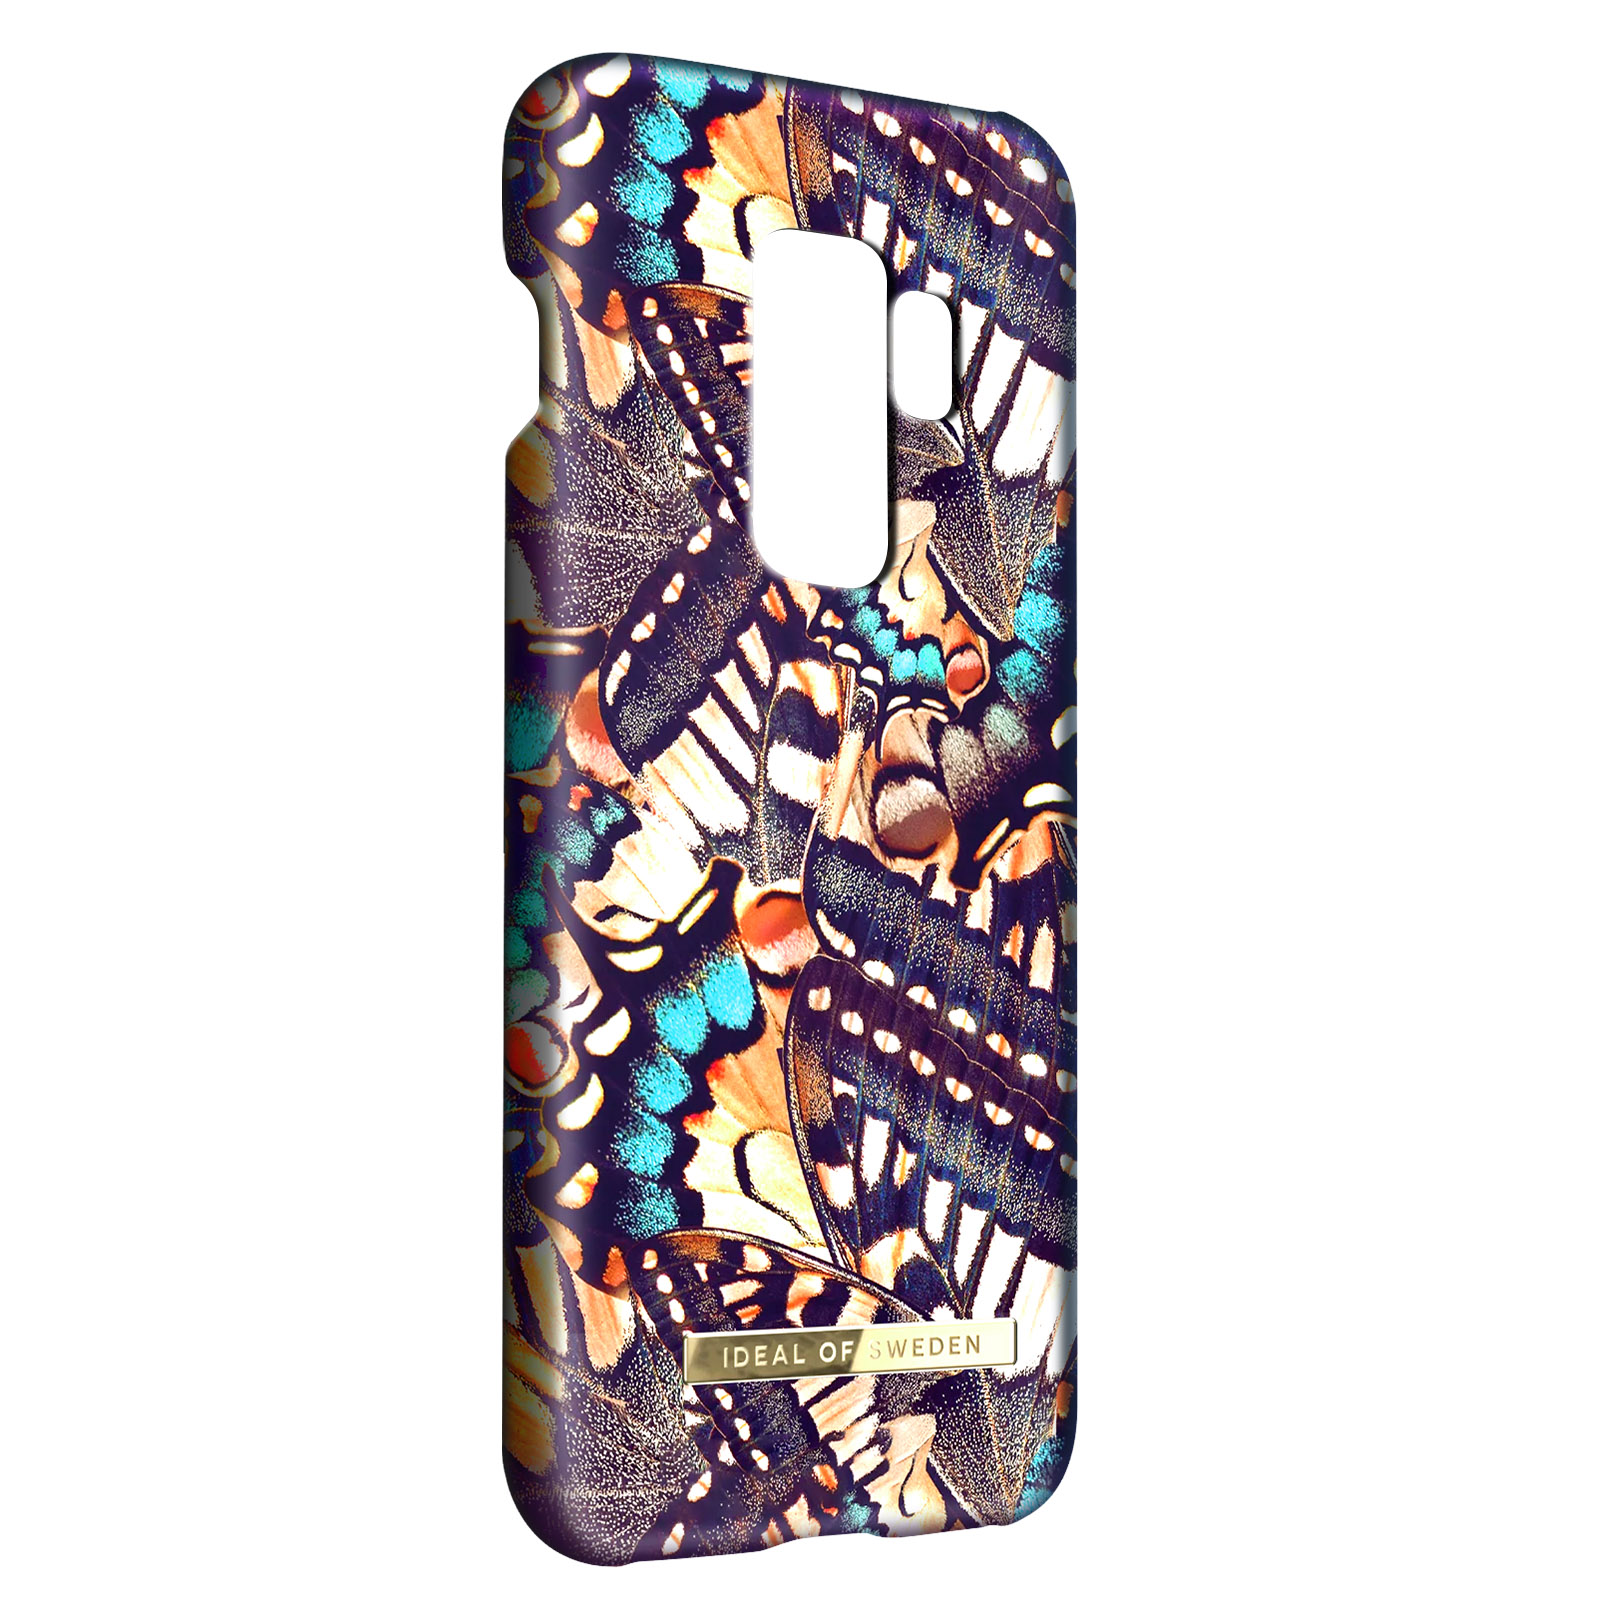 Fly With Hülle Series, Galaxy IDEAL OF Samsung, Backcover, Bunt S9, Me Away SWEDEN